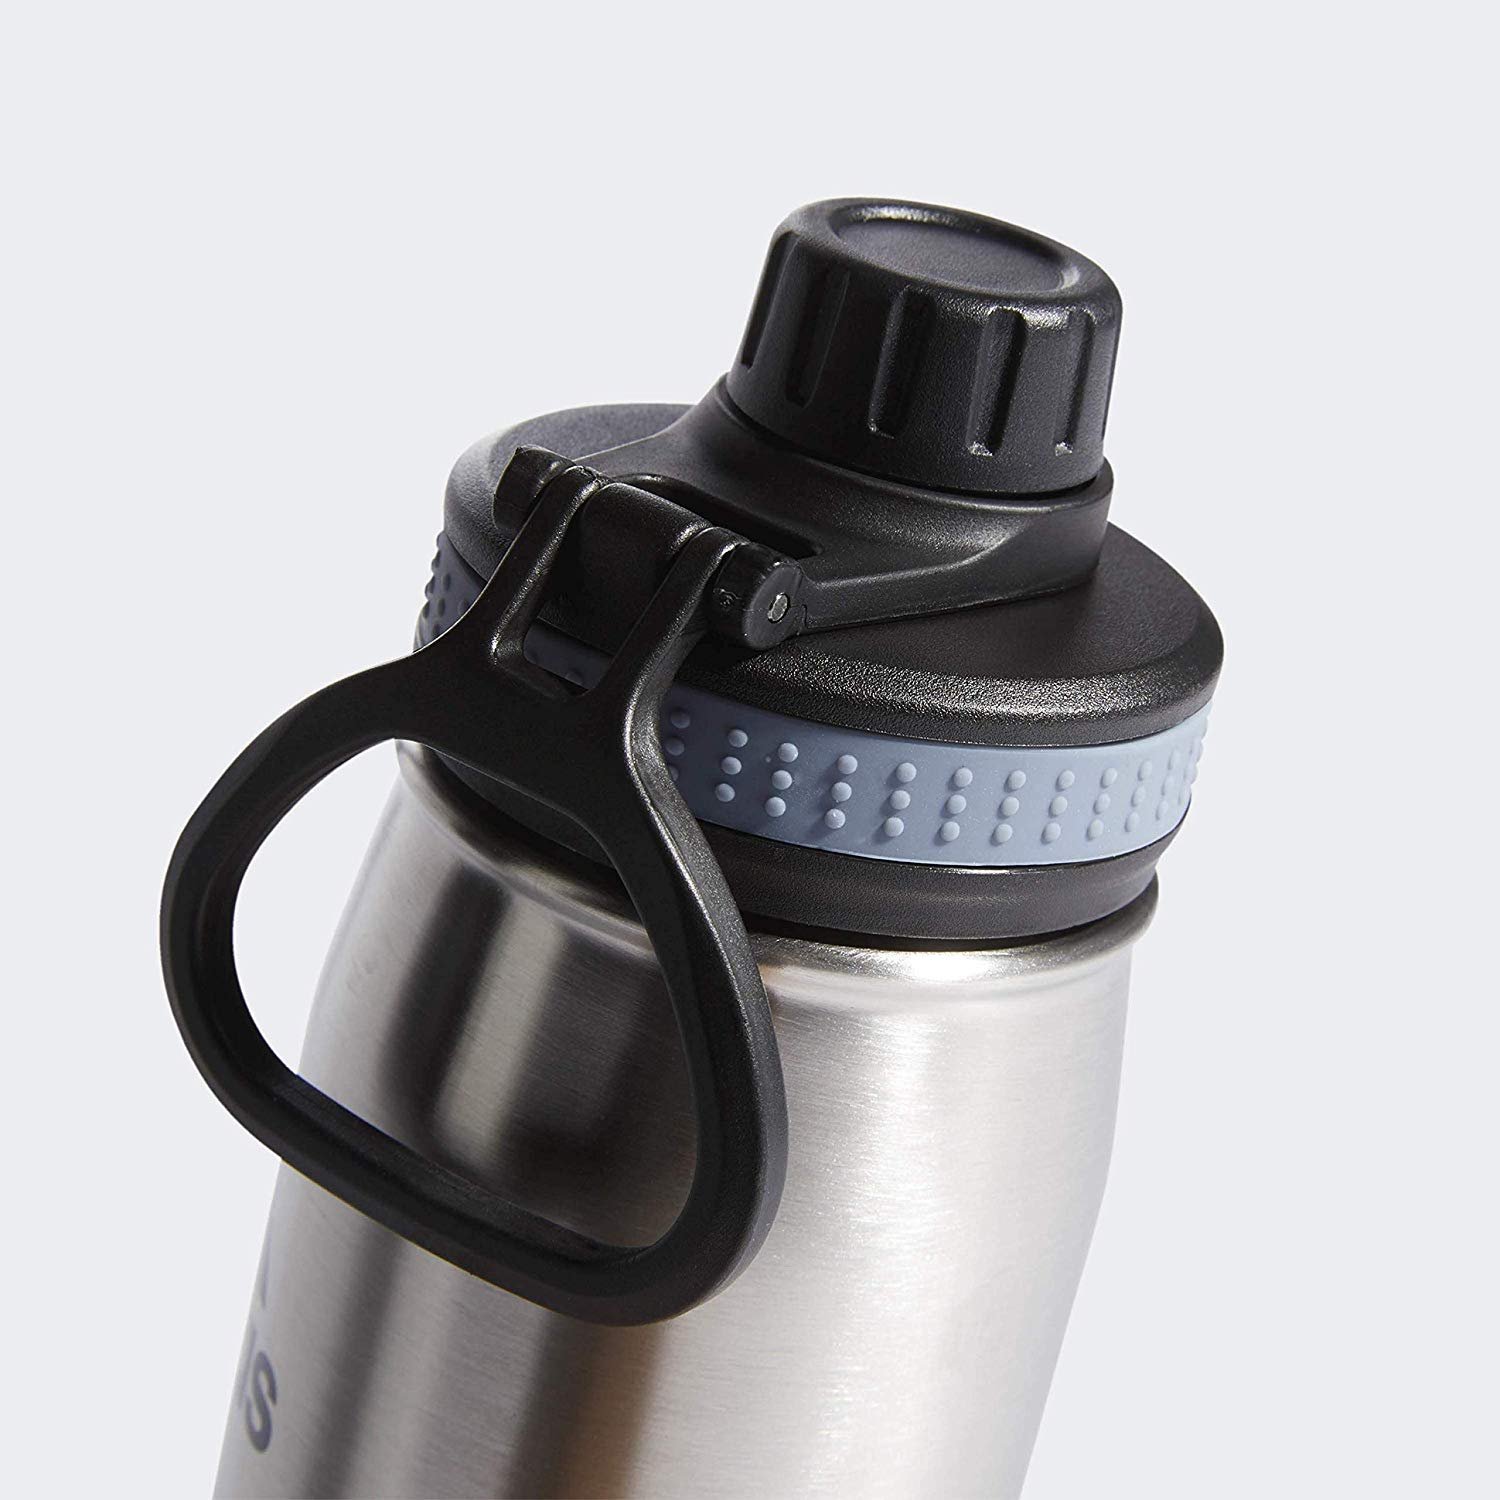 https://bestcoffeeprice.com/wp-content/uploads/2019/10/adidas-Unisex-Stainless-Steel-1L-Hot-Cold-Insulated-Metal-Bottle-2.jpg